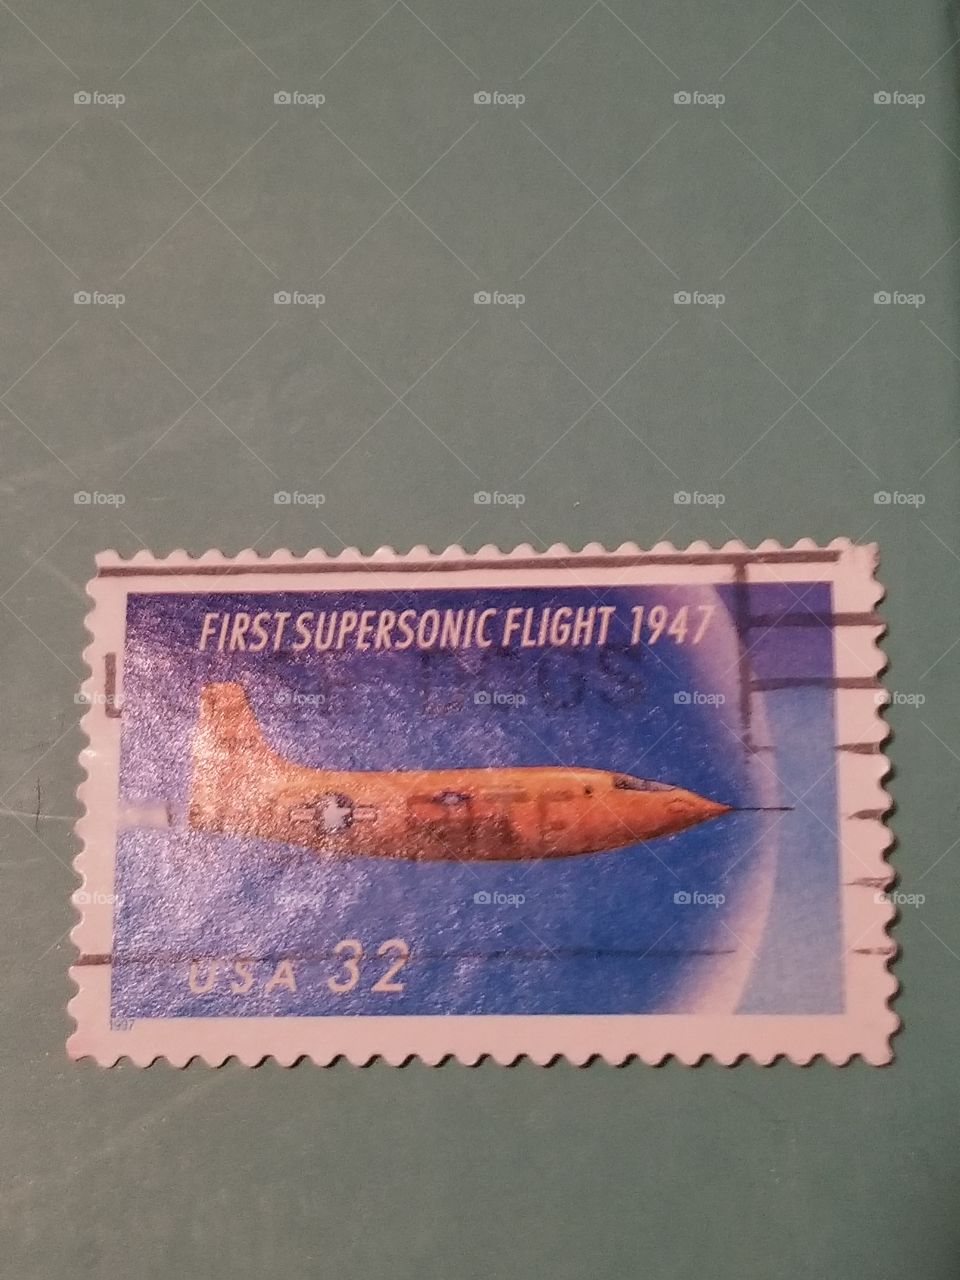 vintage stamp from 1947